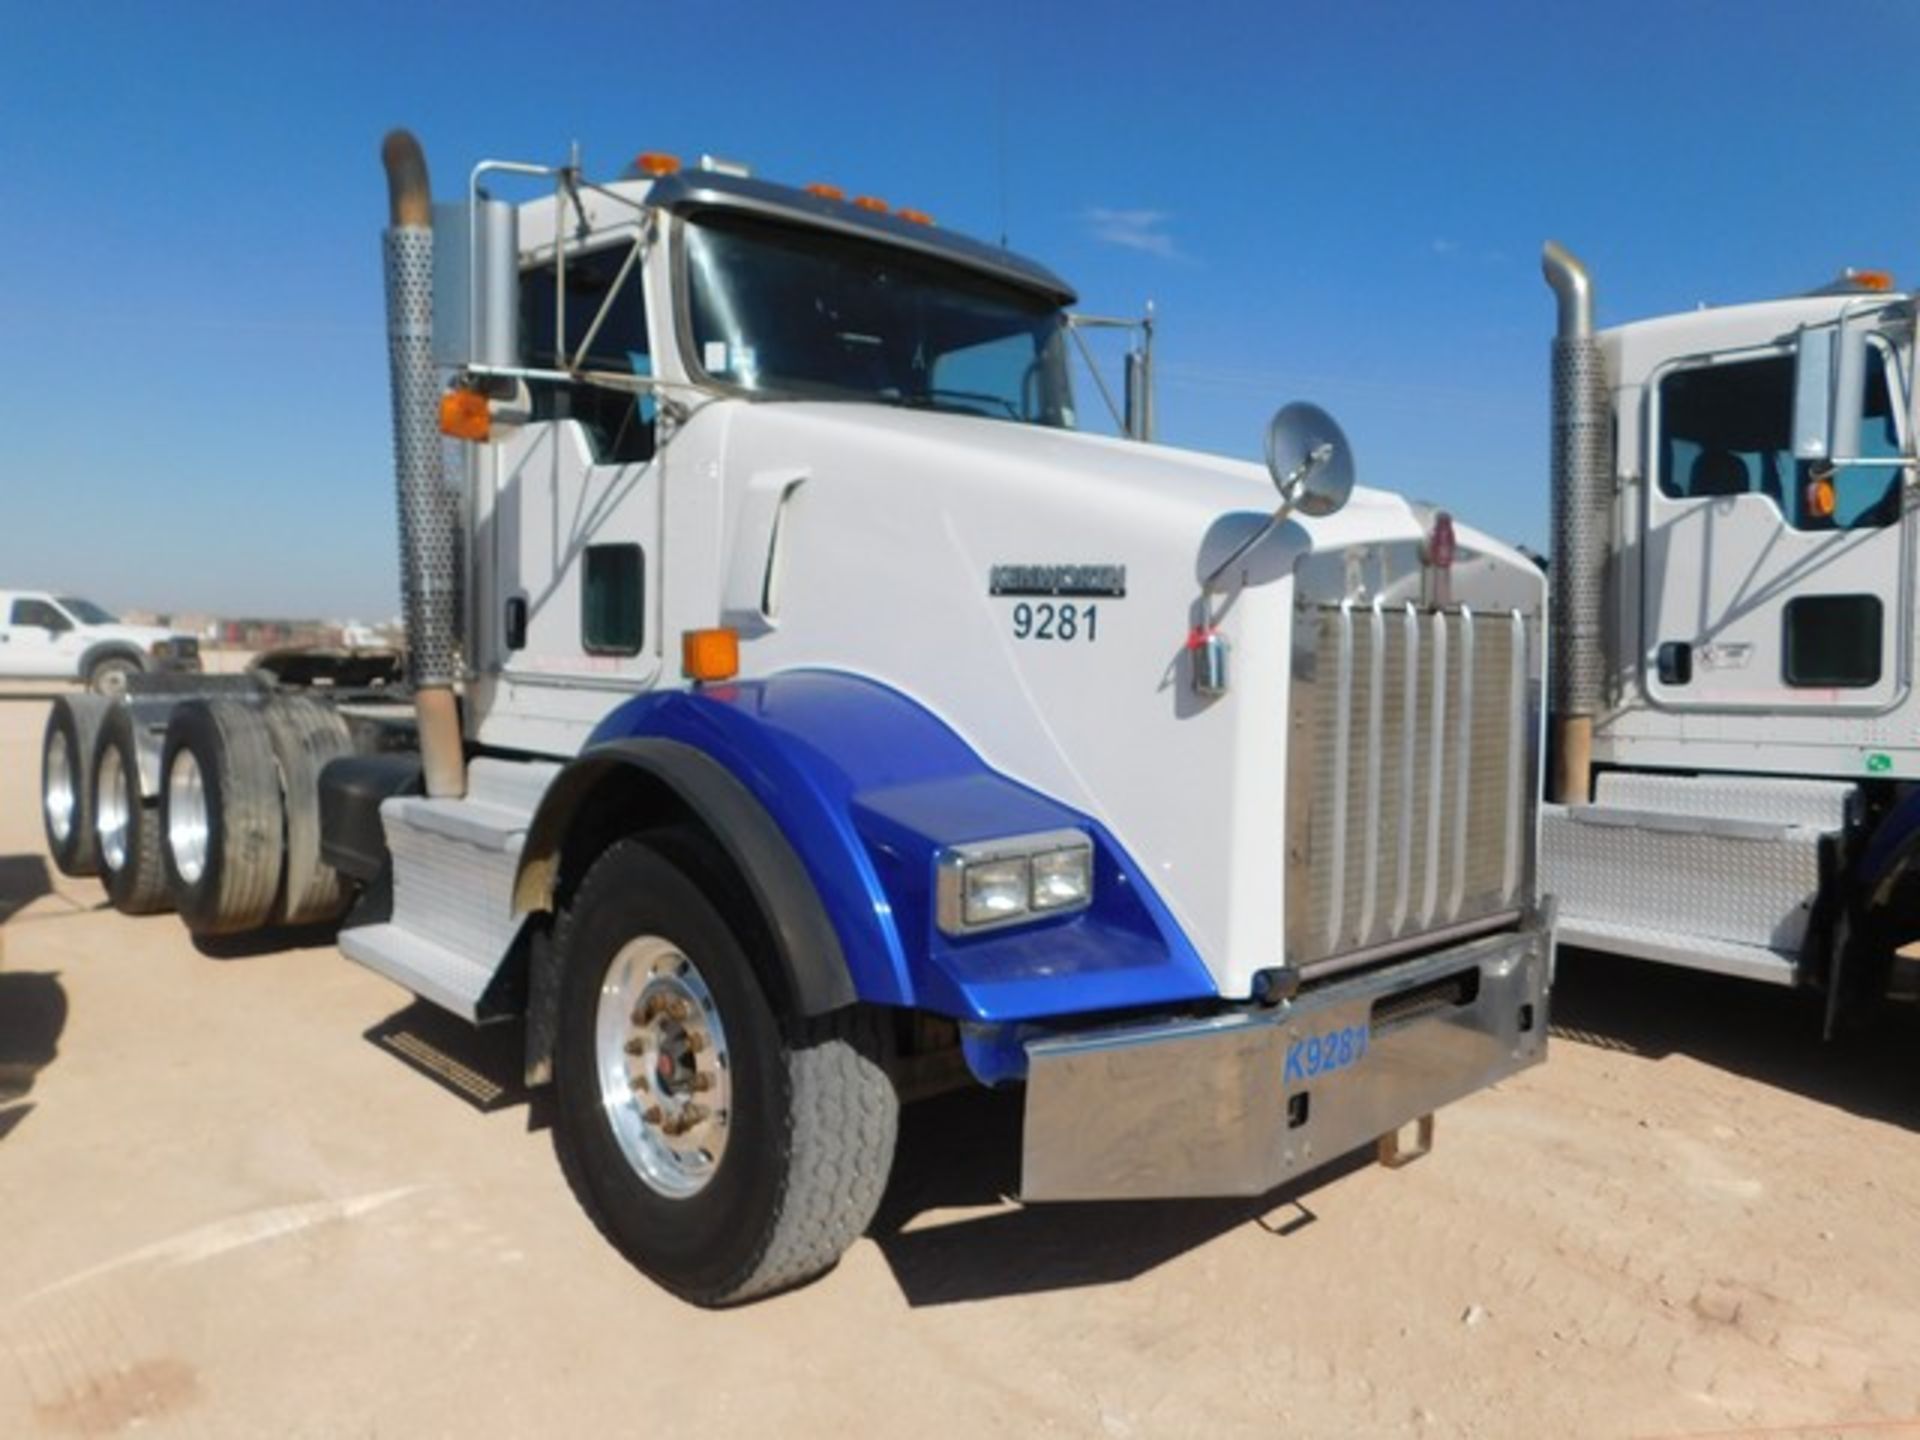 Located in YARD 1 - Midland, TX (2264) (X) 2013 KENWORTH T800 4 AXLE DAY CAB HAUL TRUCK, VIN- - Image 2 of 8